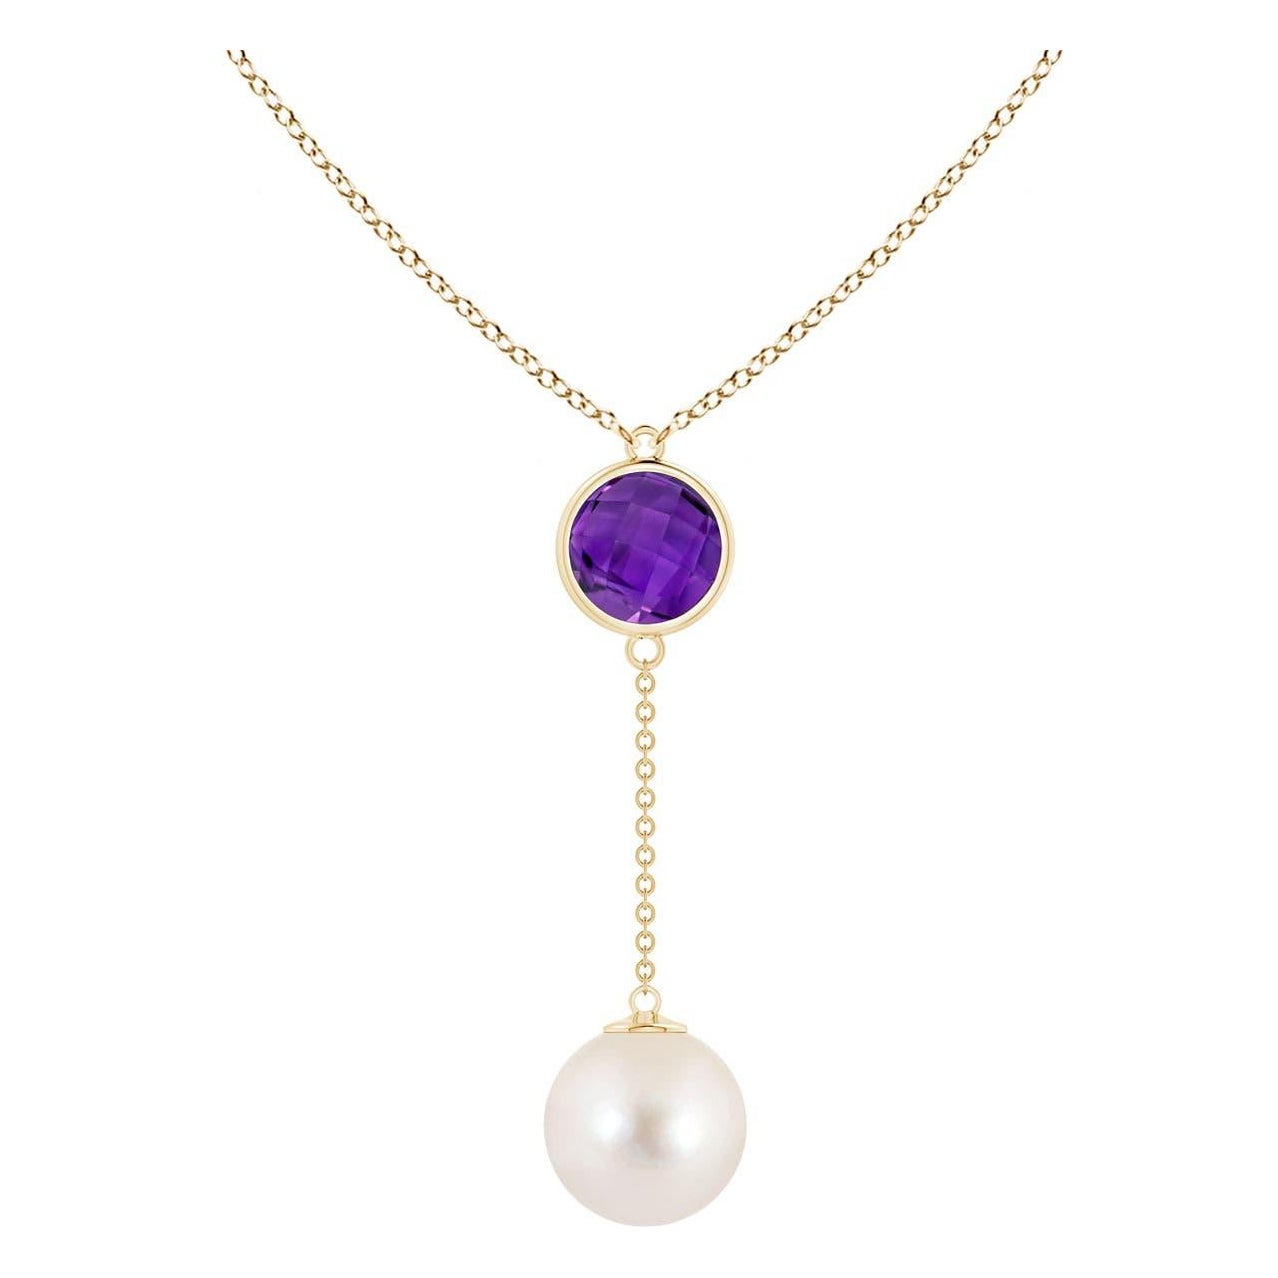 Freshwater Cultured Pearl & 1.65ct Amethyst Lariat Necklace in 14K Yellow Gold